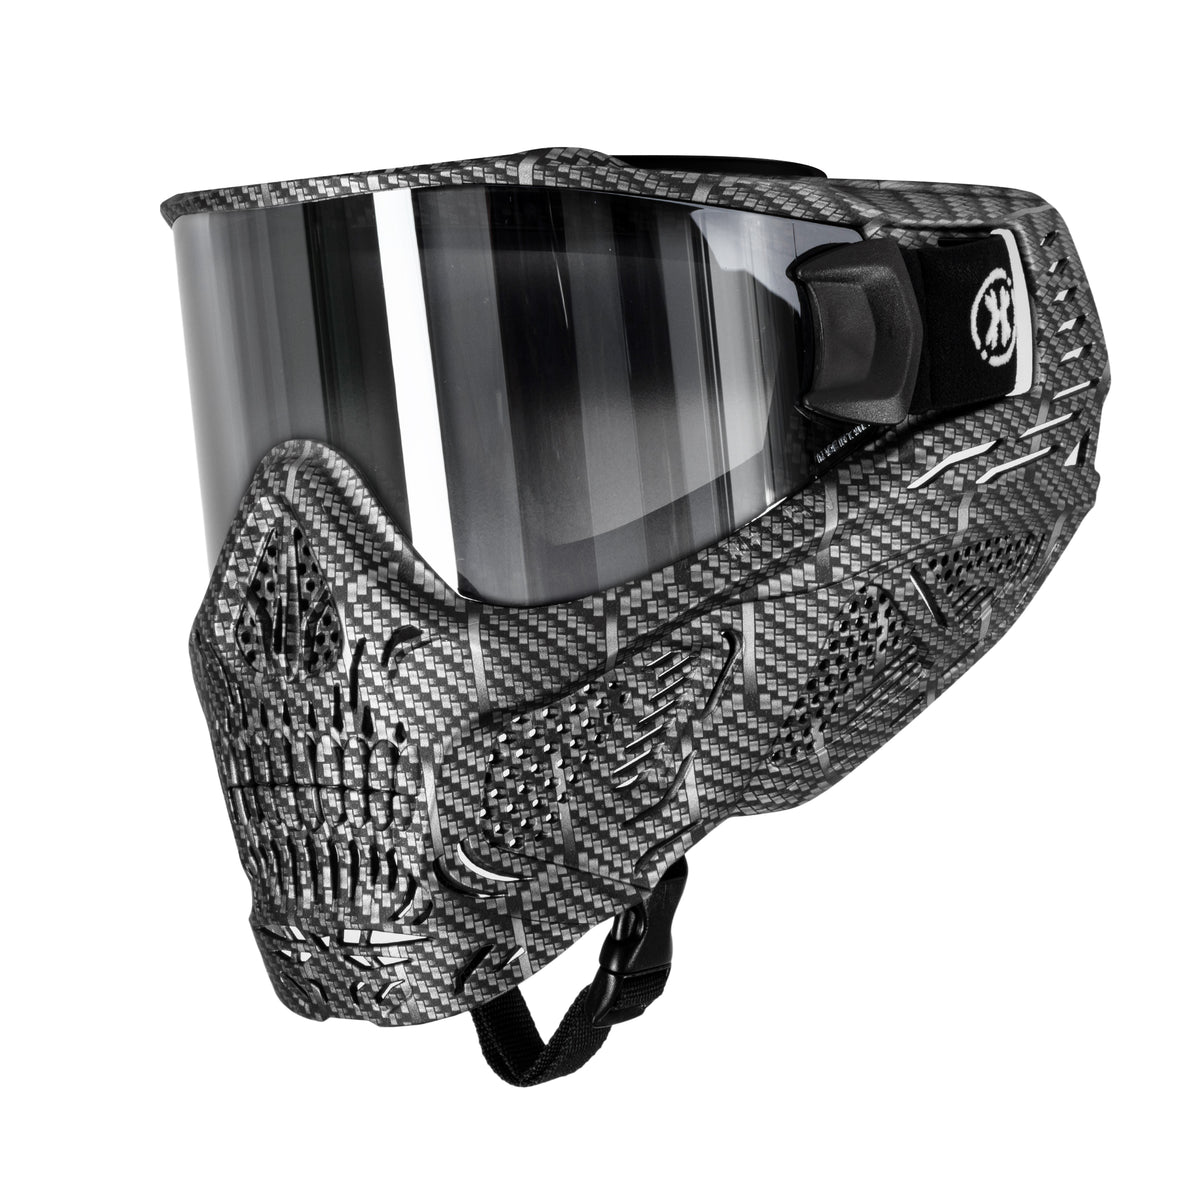 HSTL Skull Goggle "Machine Silver" W/ Chrome Lens | Paintball Goggle | Mask | Hk Army